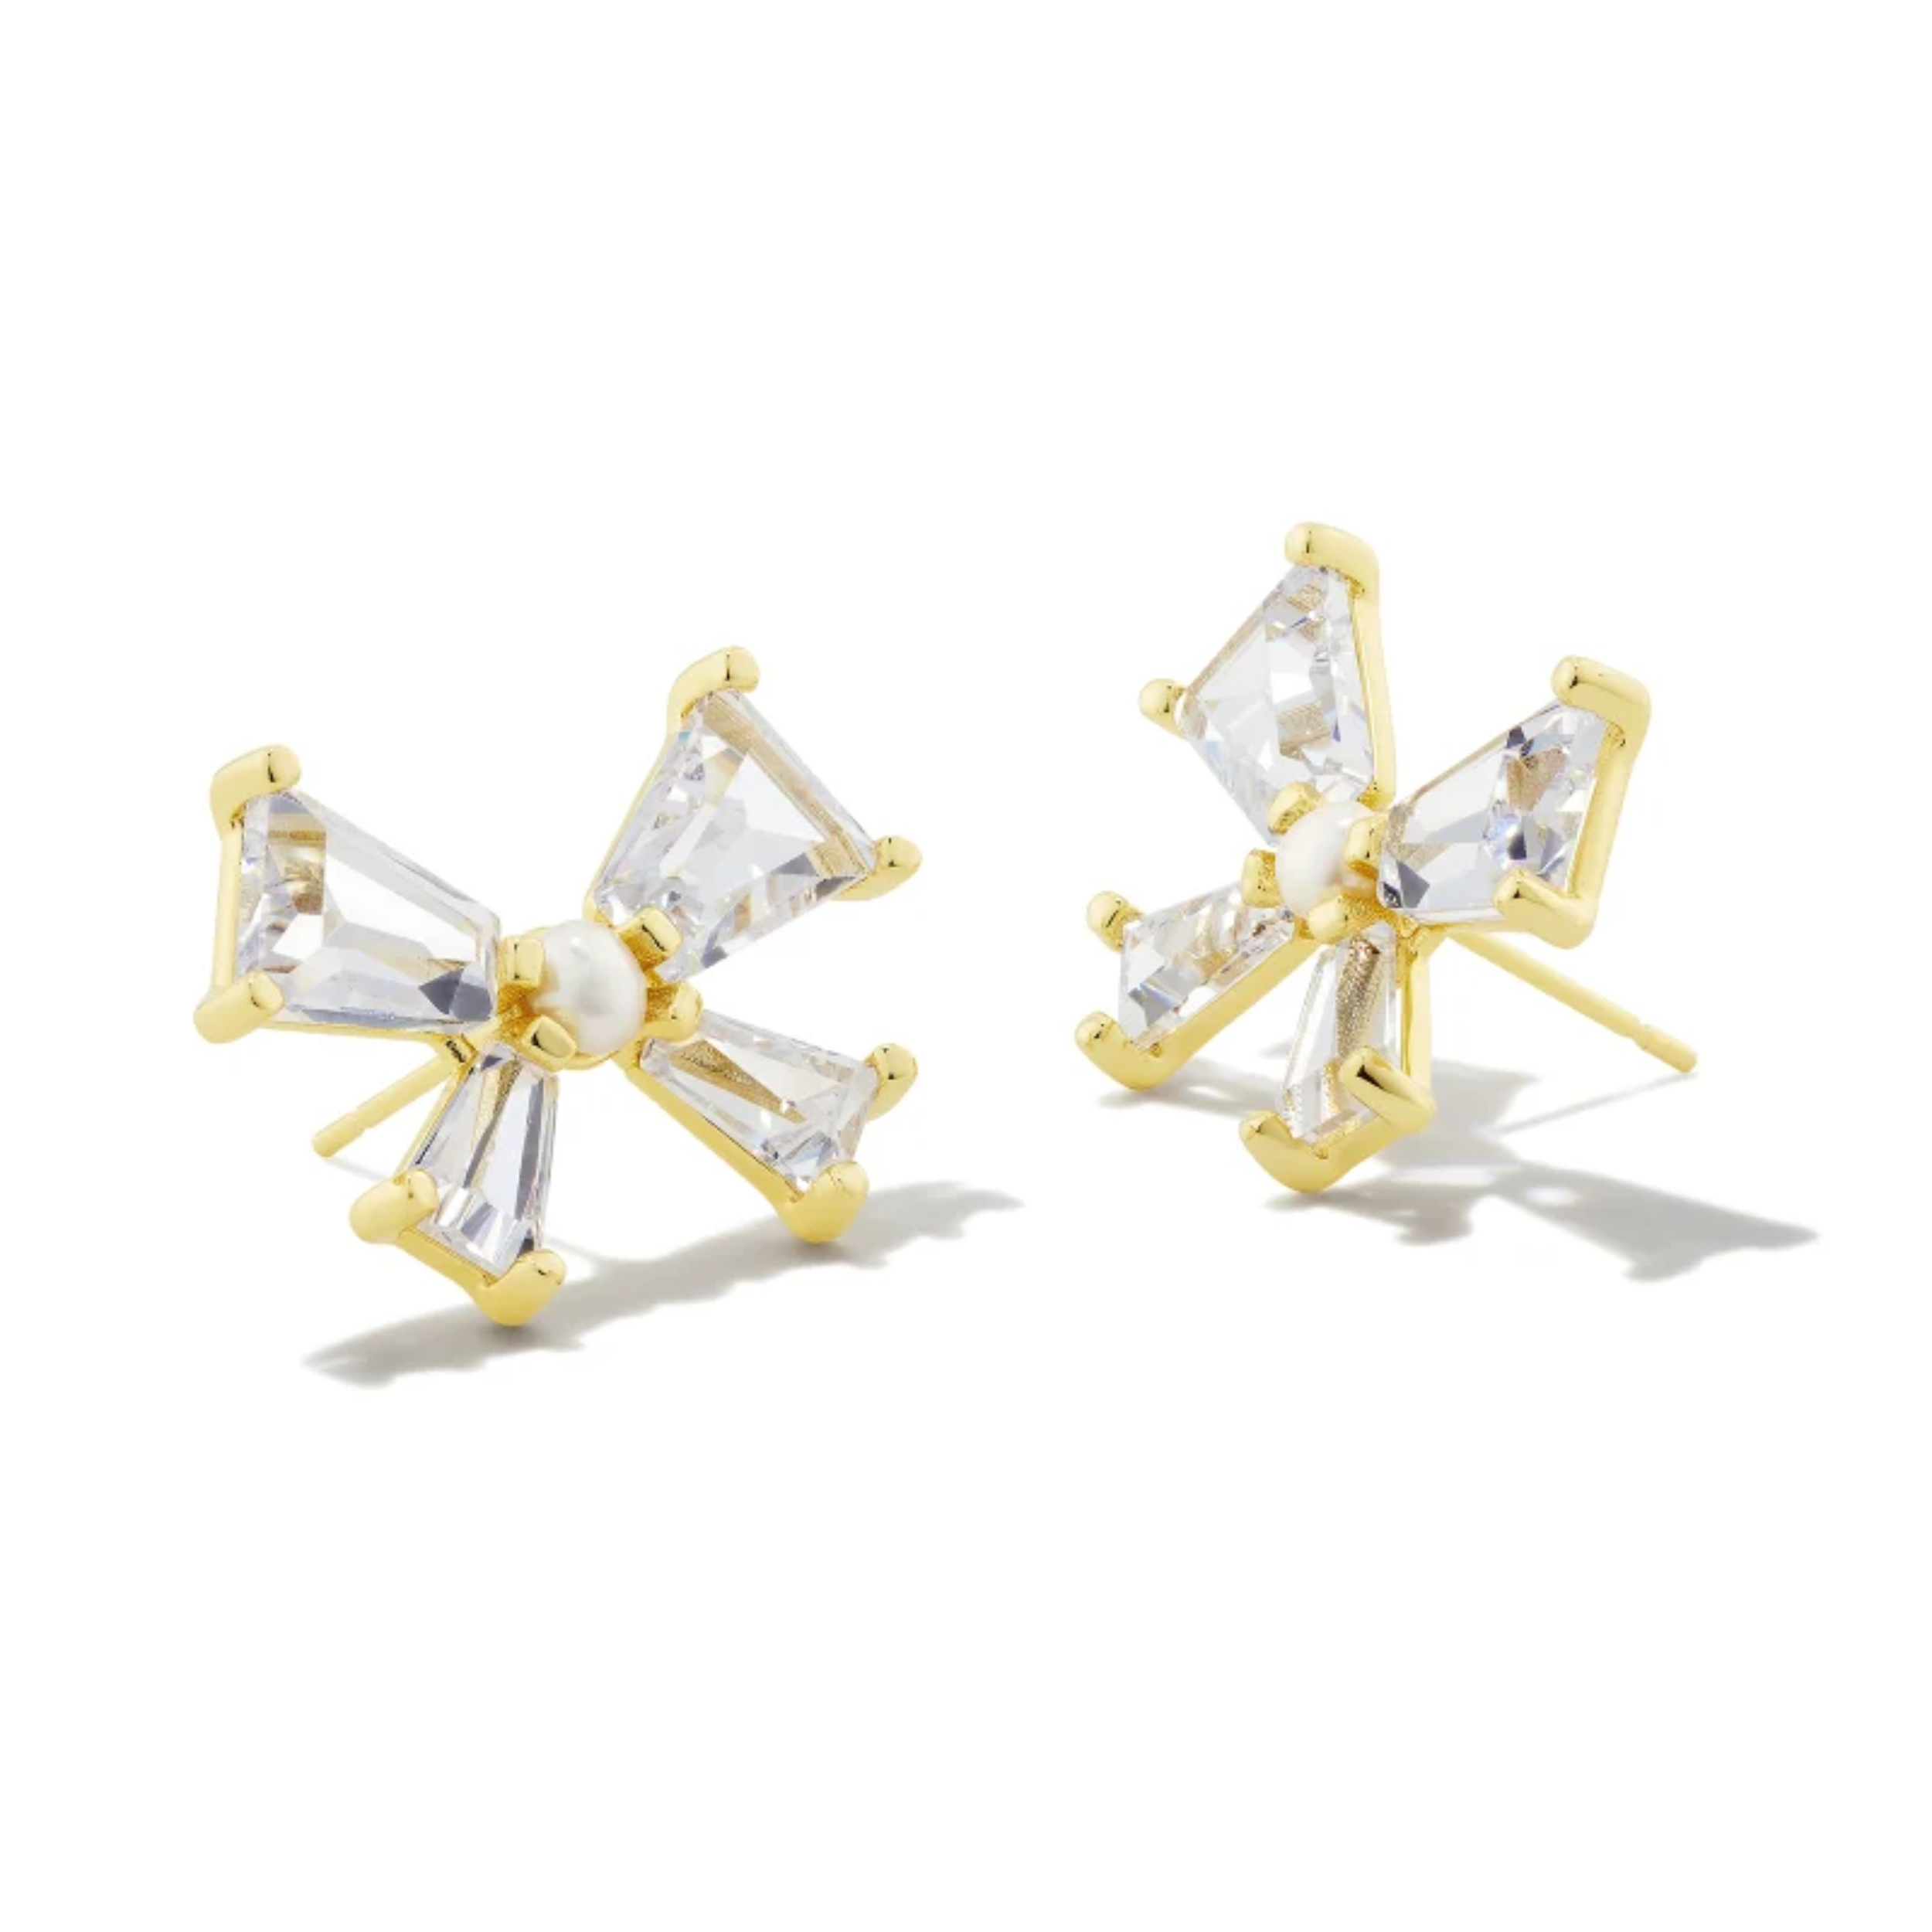 These Blair Bow Stud Earrings In Gold White by Kendra Scott is pictured on a white background.